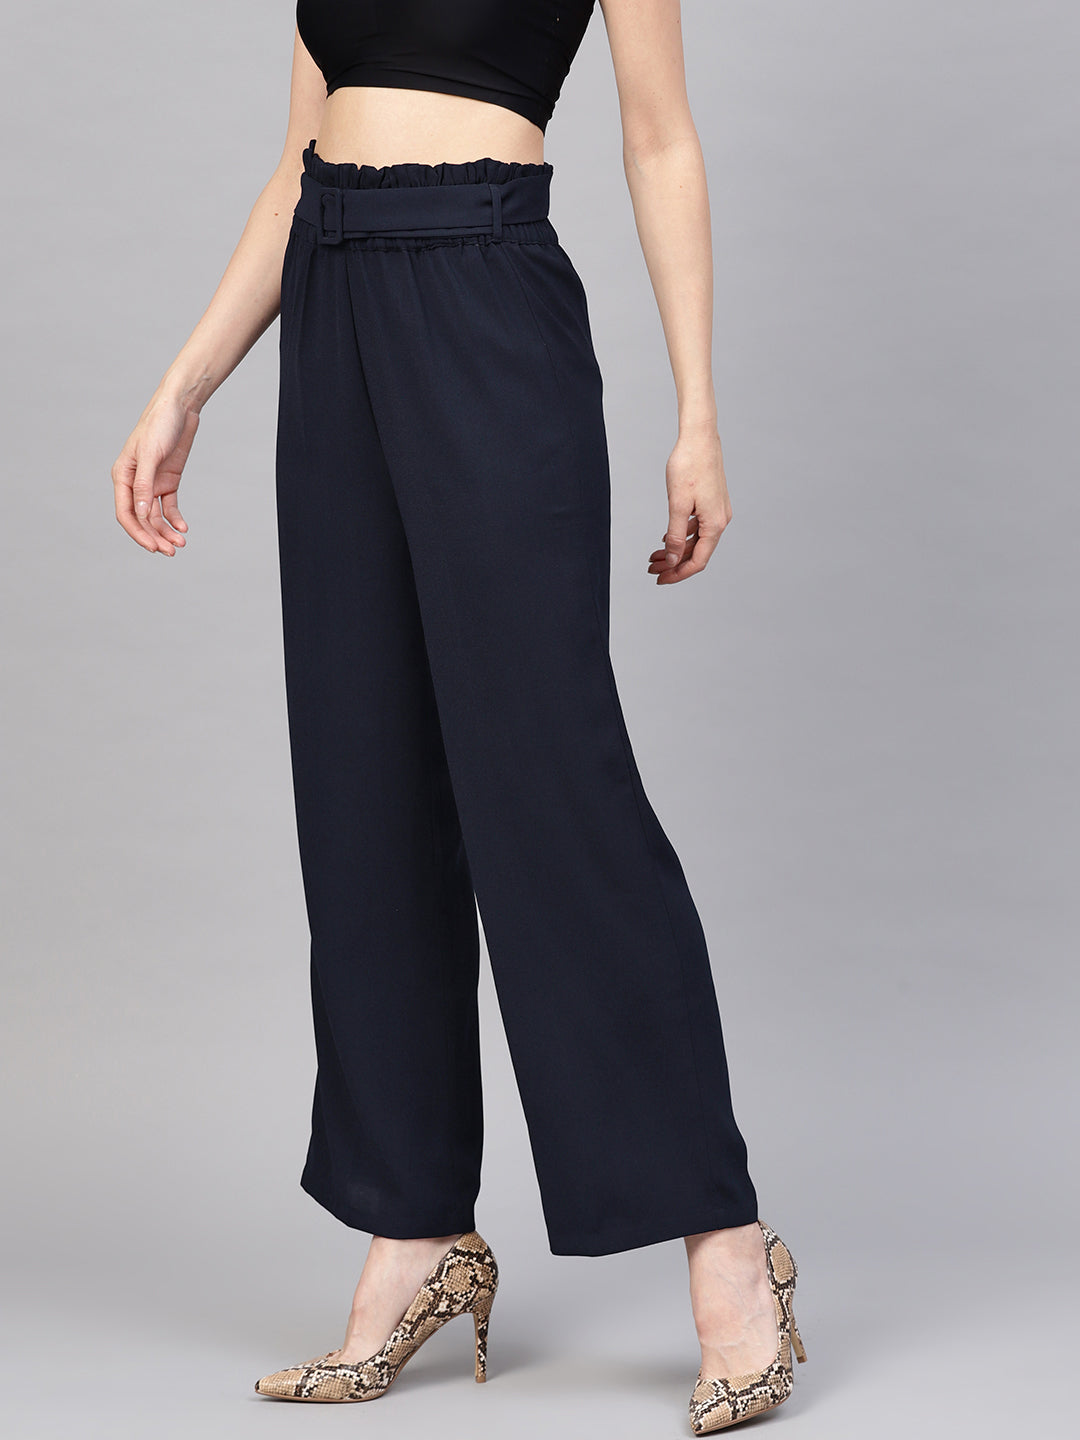 Black cropped belted trousers  Loewe  Département Féminin